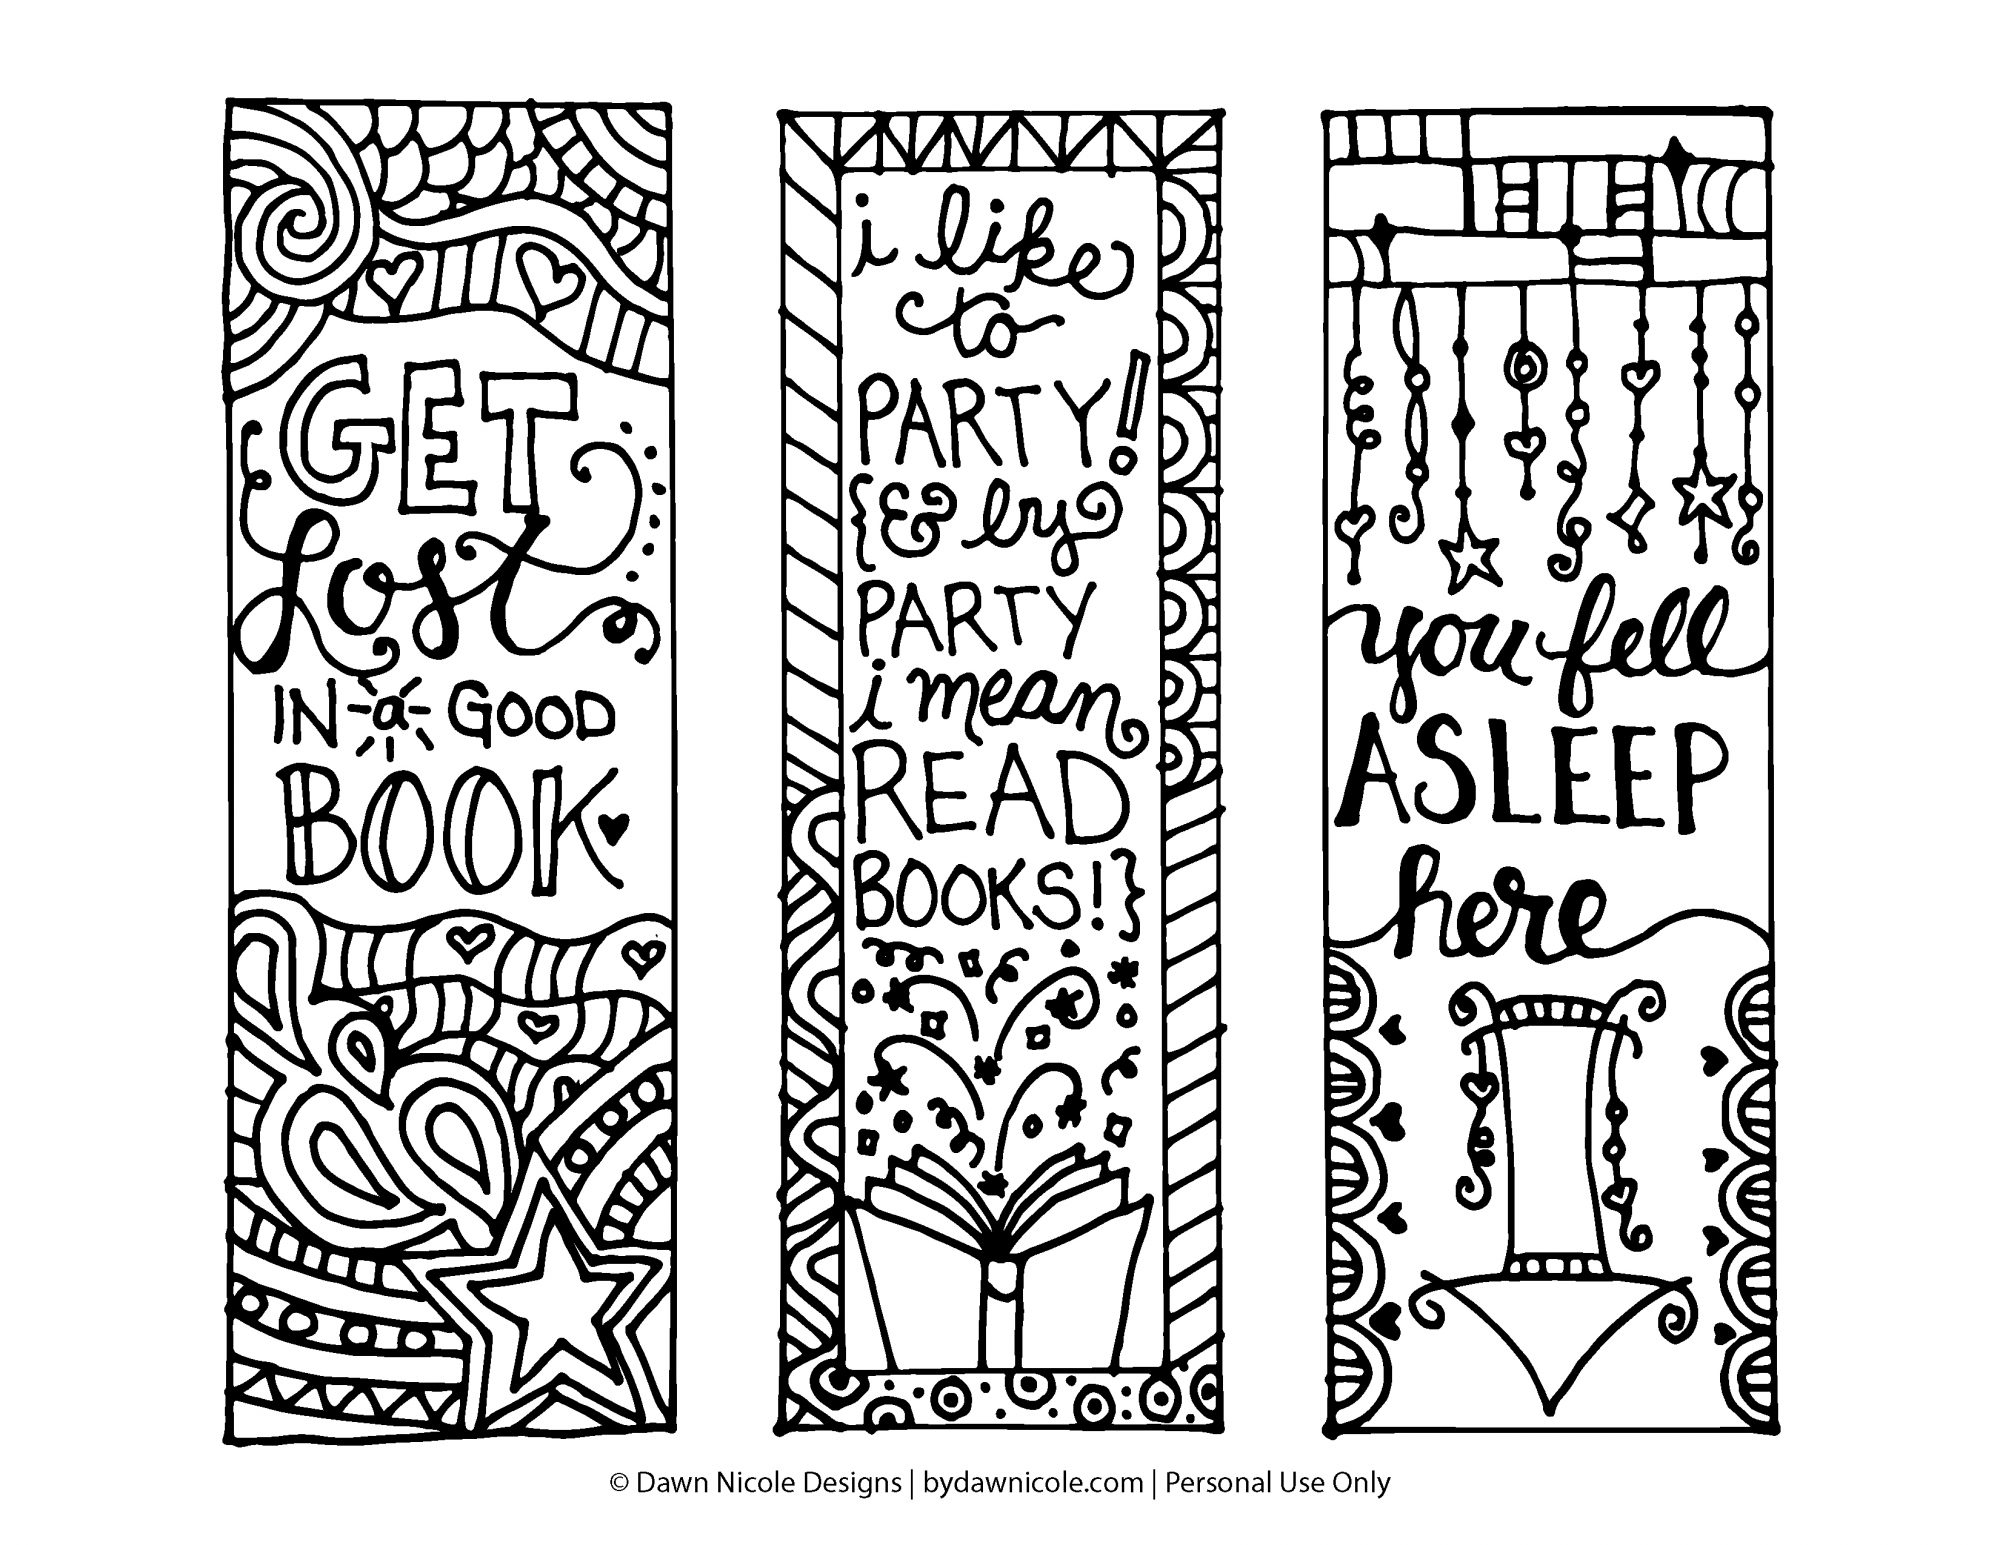 Free Printable Coloring Page Bookmarks | Dawn Nicole Designs® - Free Printable Bookmarks